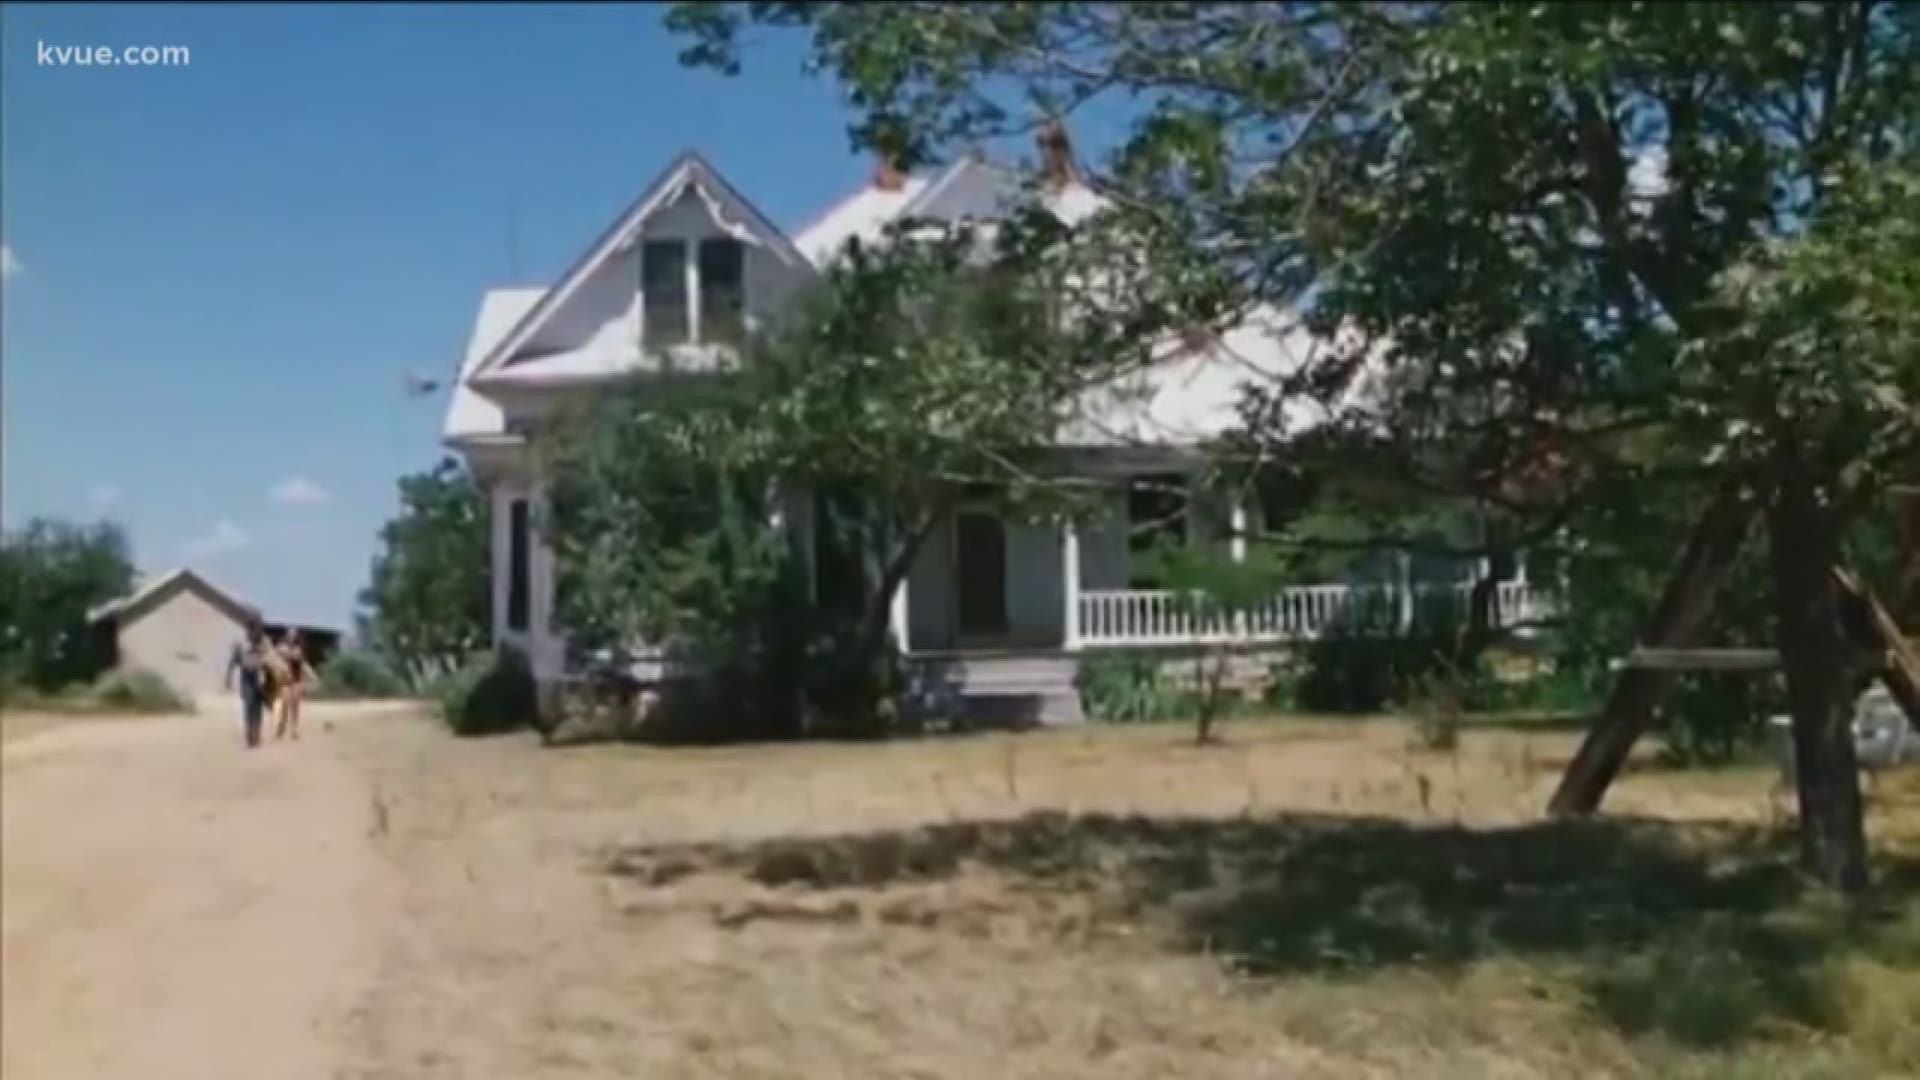 No need to wait until Halloween to get spooked. You can dine in the original home featured in the 1970s film Texas Chainsaw Massacre in Kingsland.